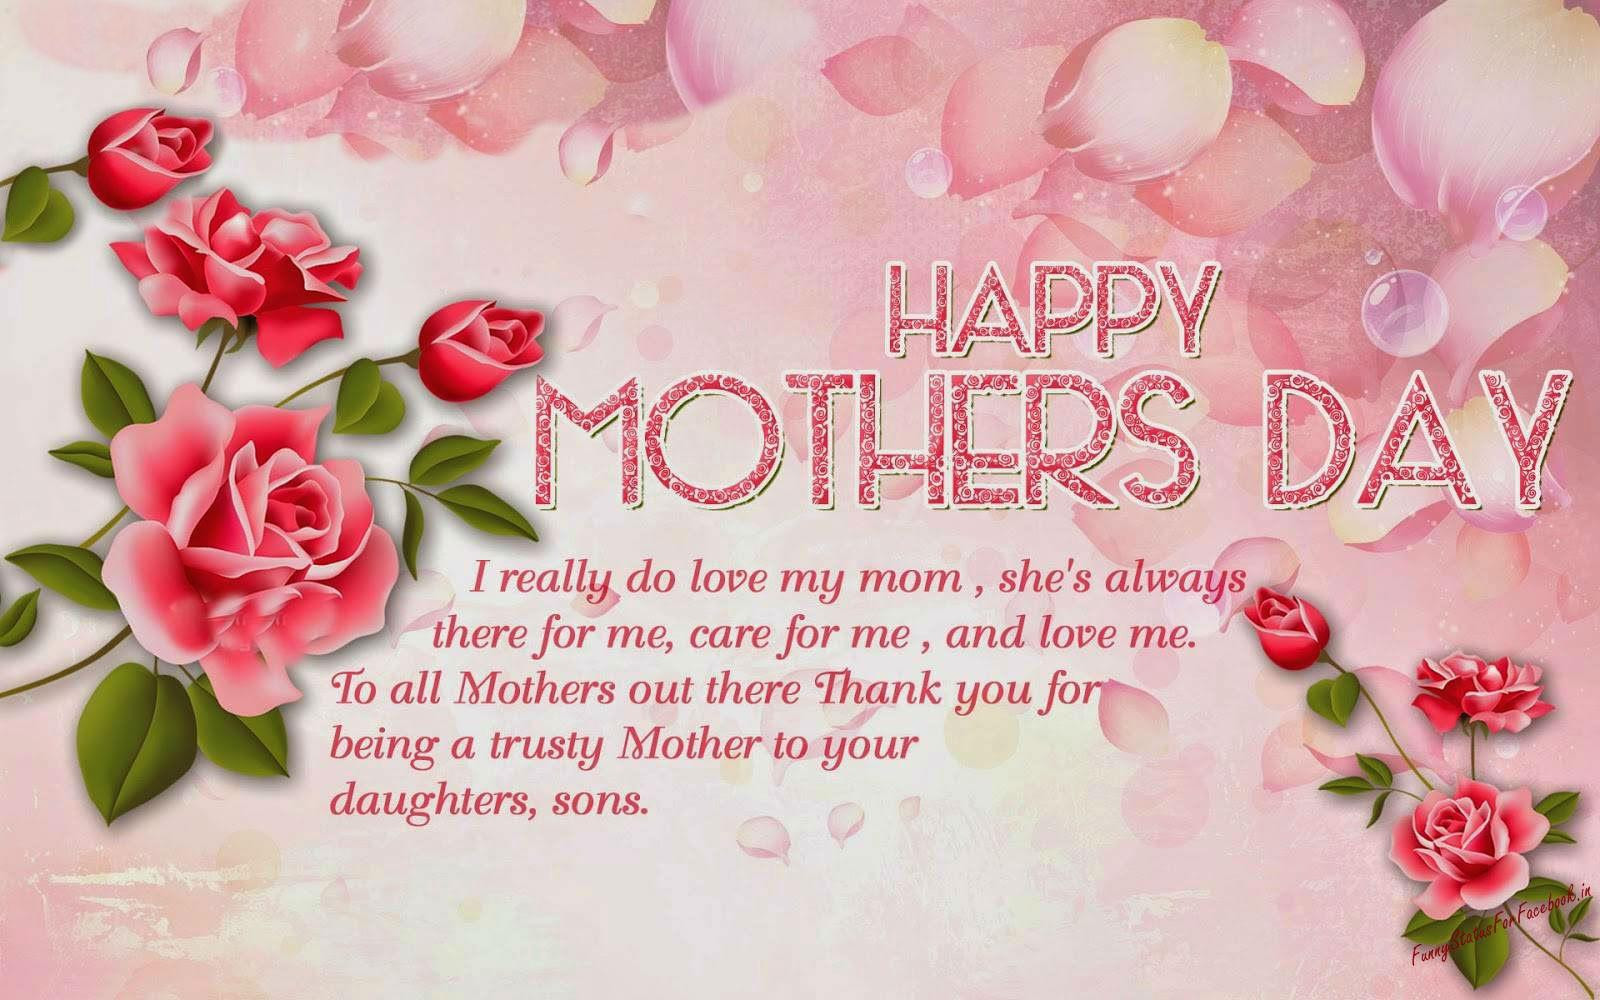 Mothers Day Quotes For Friends
 Happy Mother s Day Quotes for my best Friend